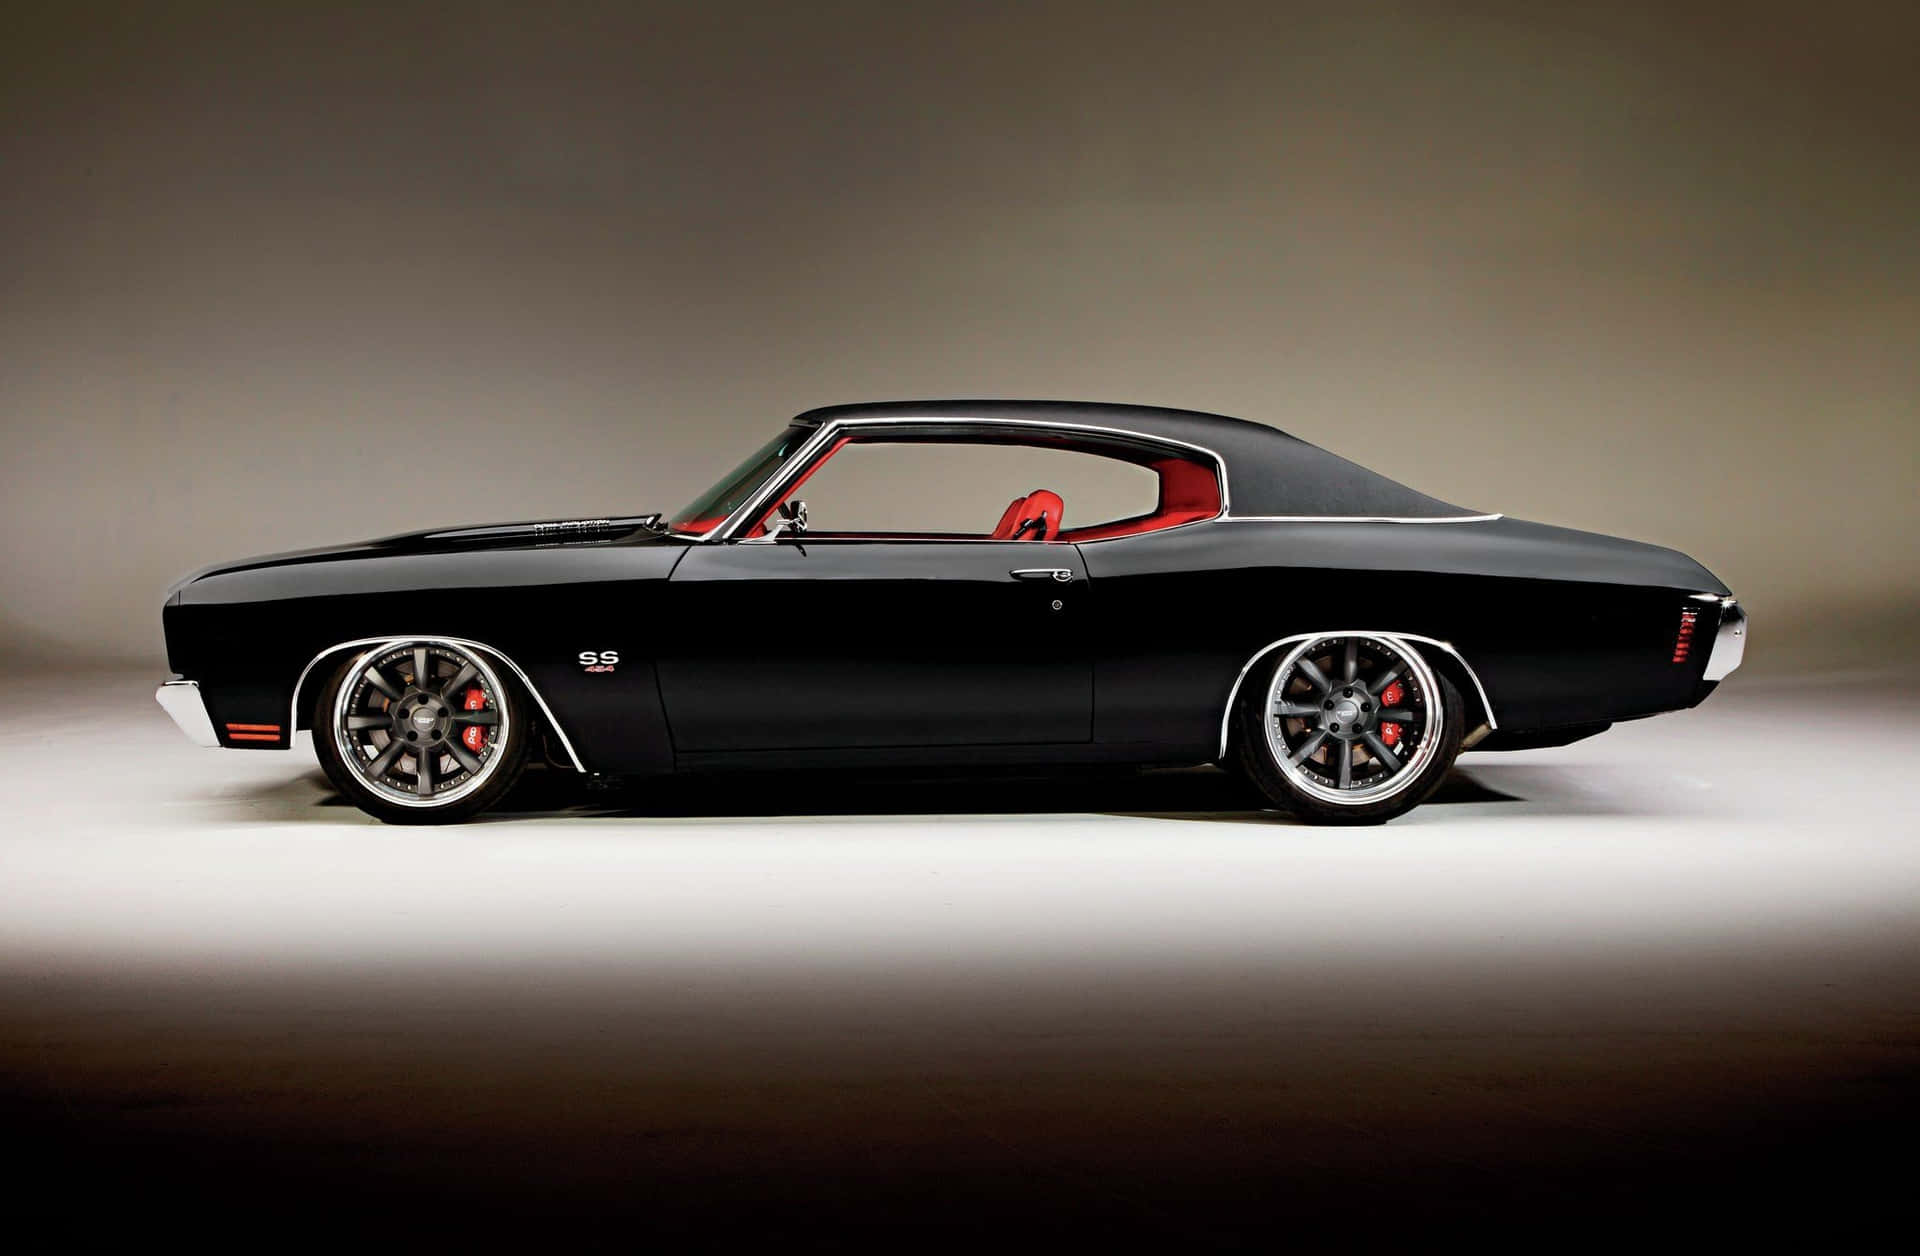 A Black Muscle Car Is Parked In A Studio